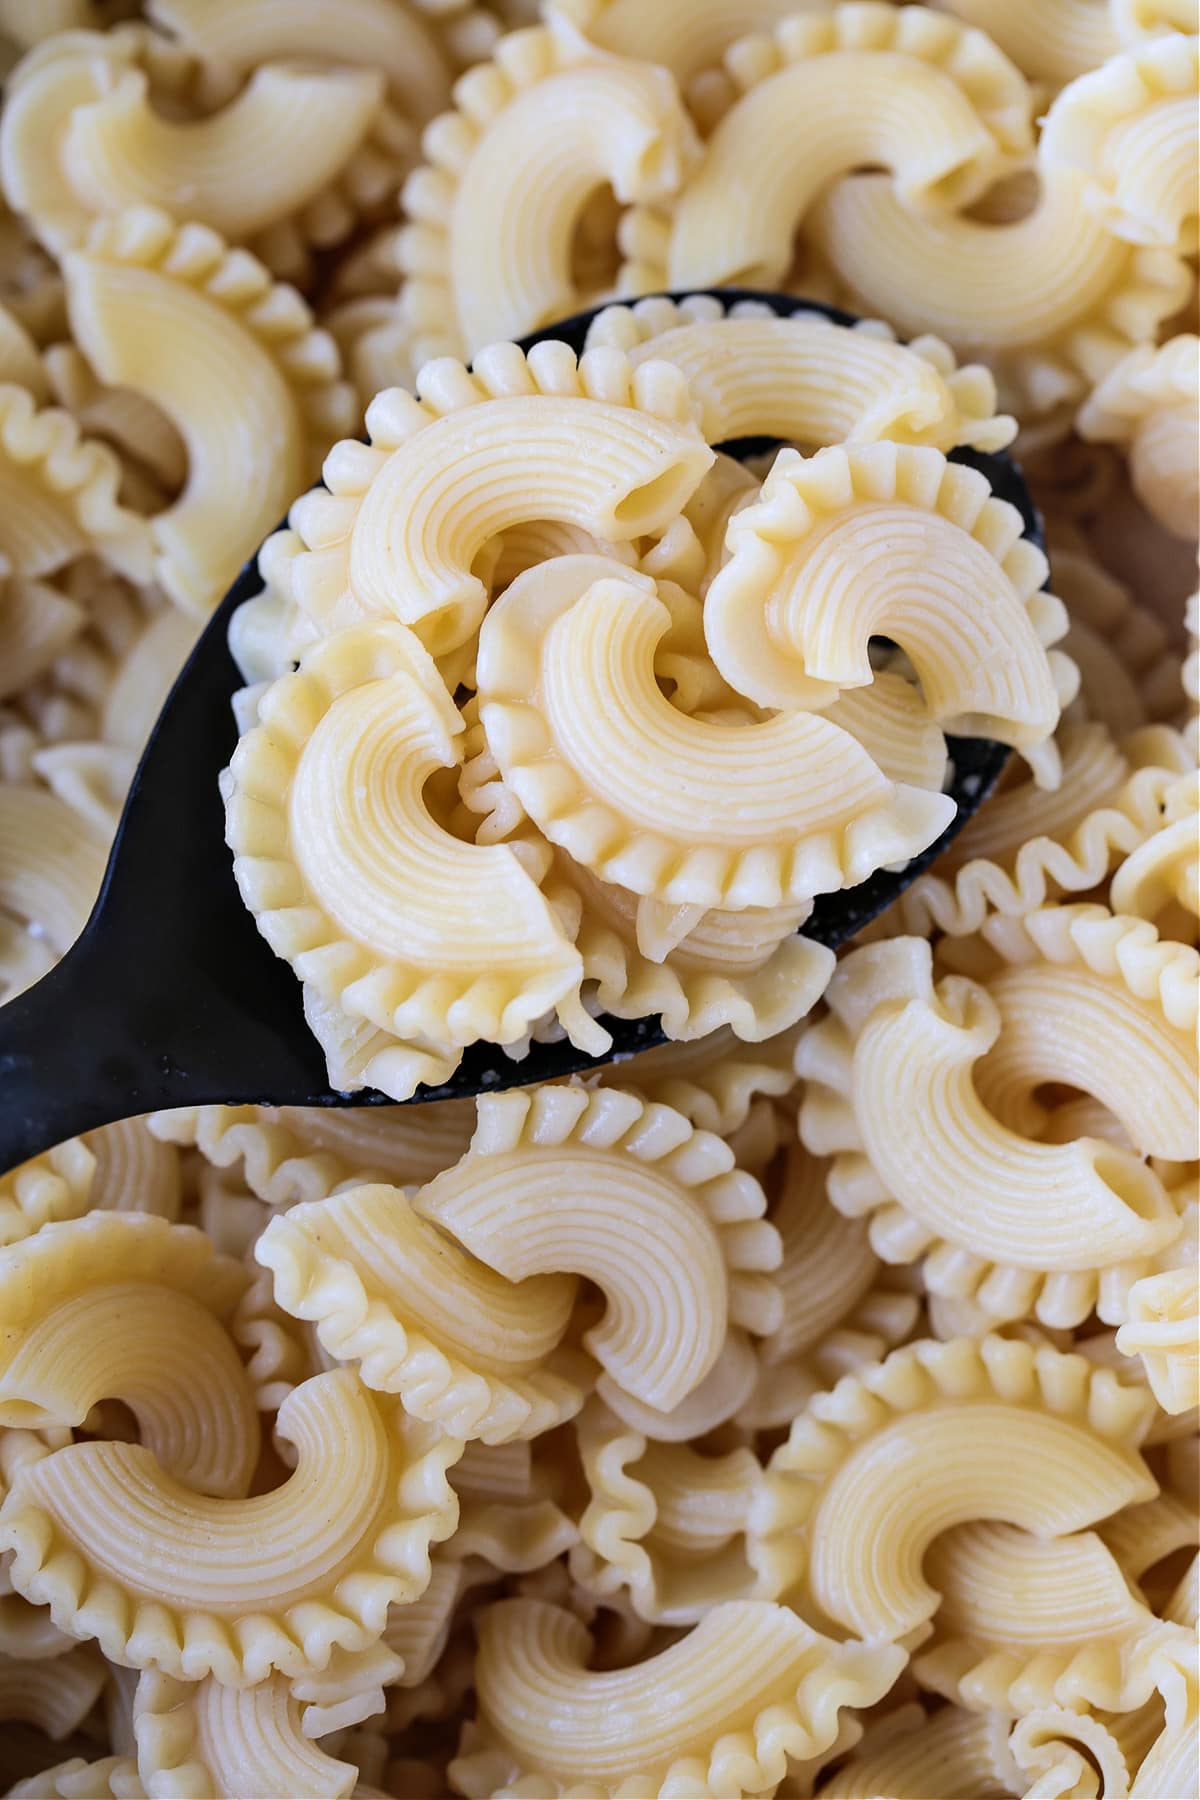 pasta shape with a curly edge